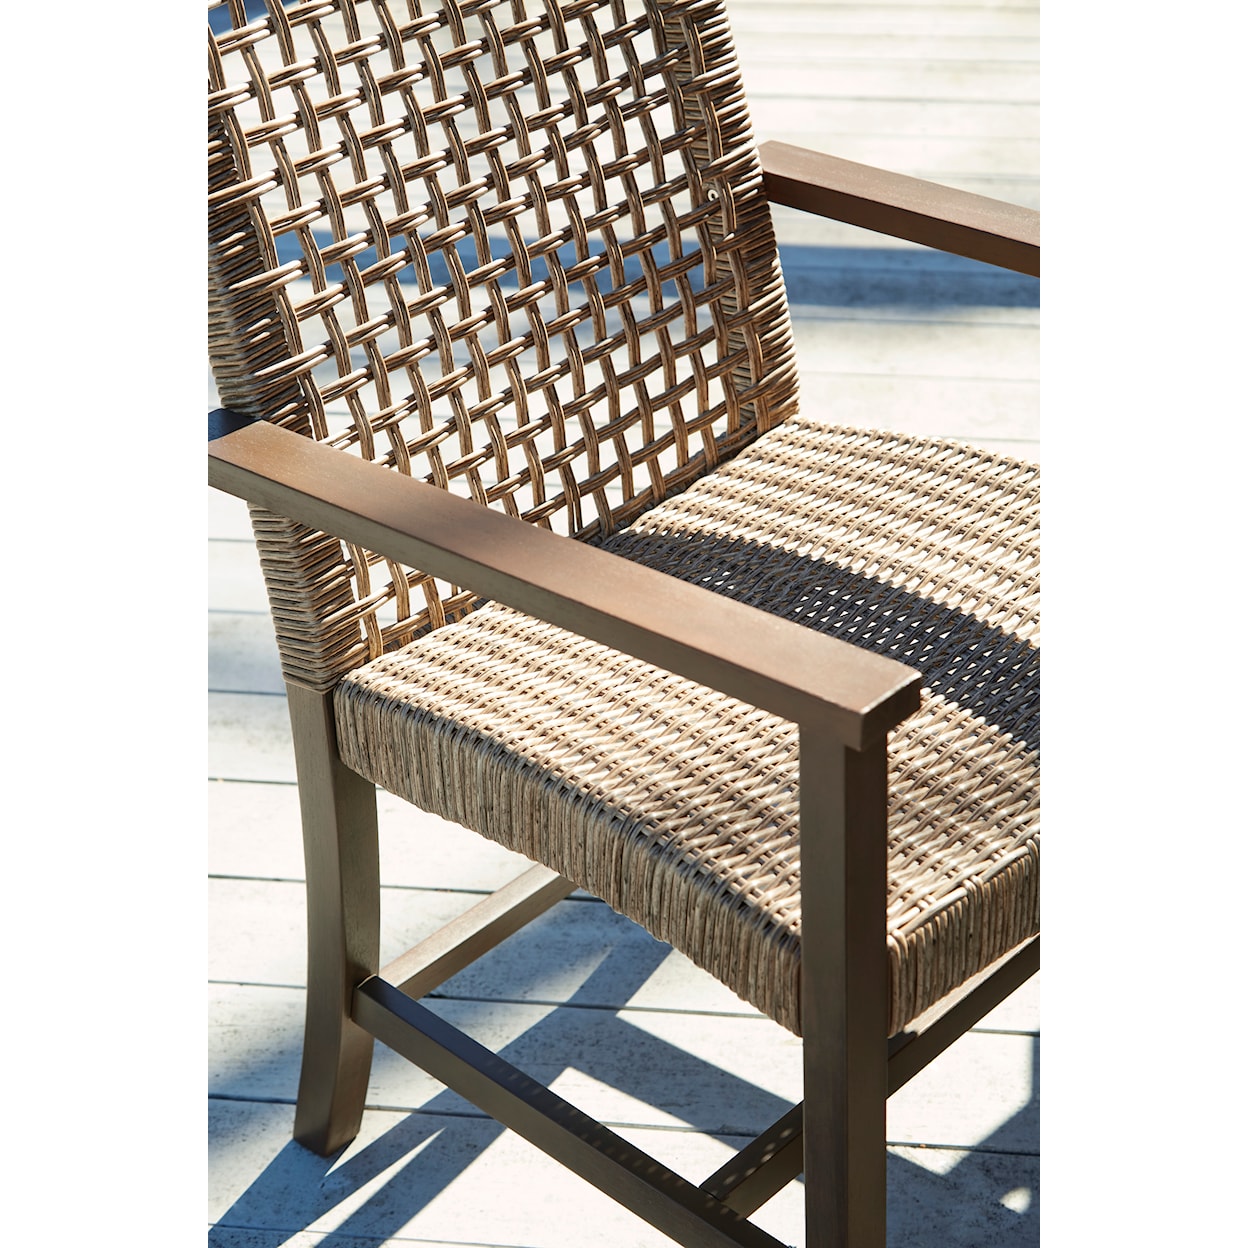 Signature Germalia Outdoor Dining Arm Chair (Set of 2)